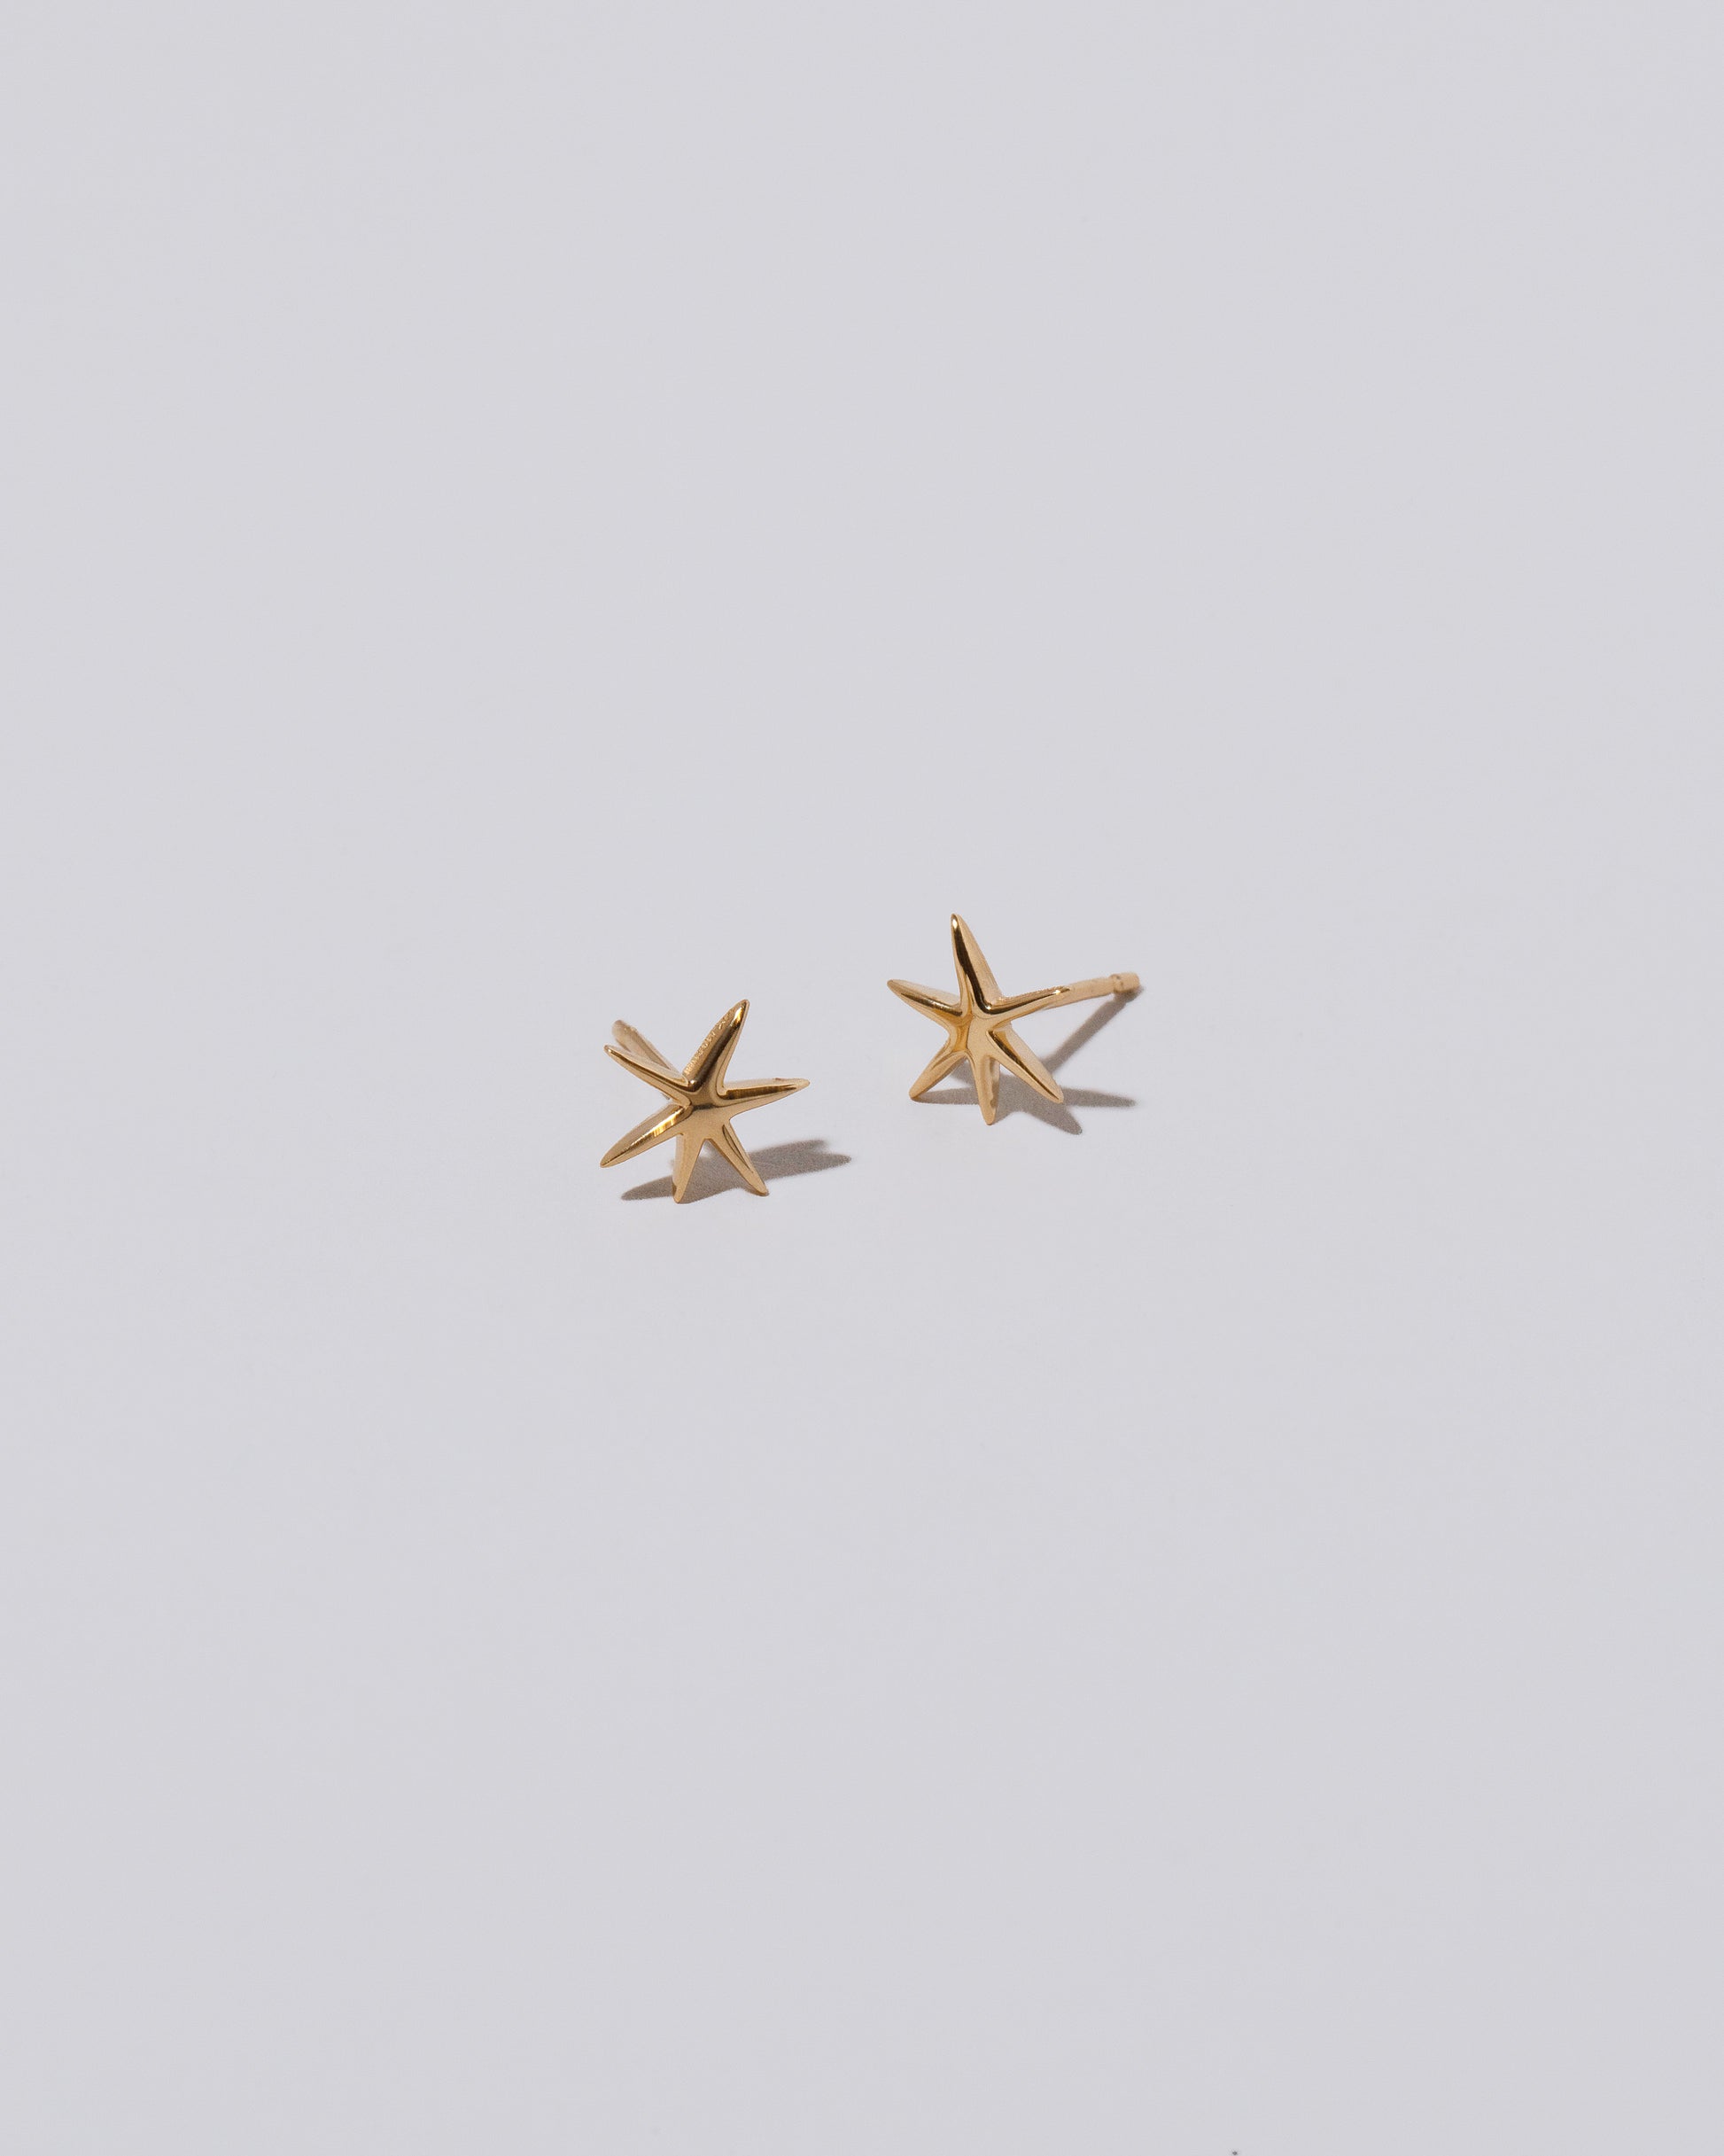 Verve Six Point Star Stud Earrings on light color background.